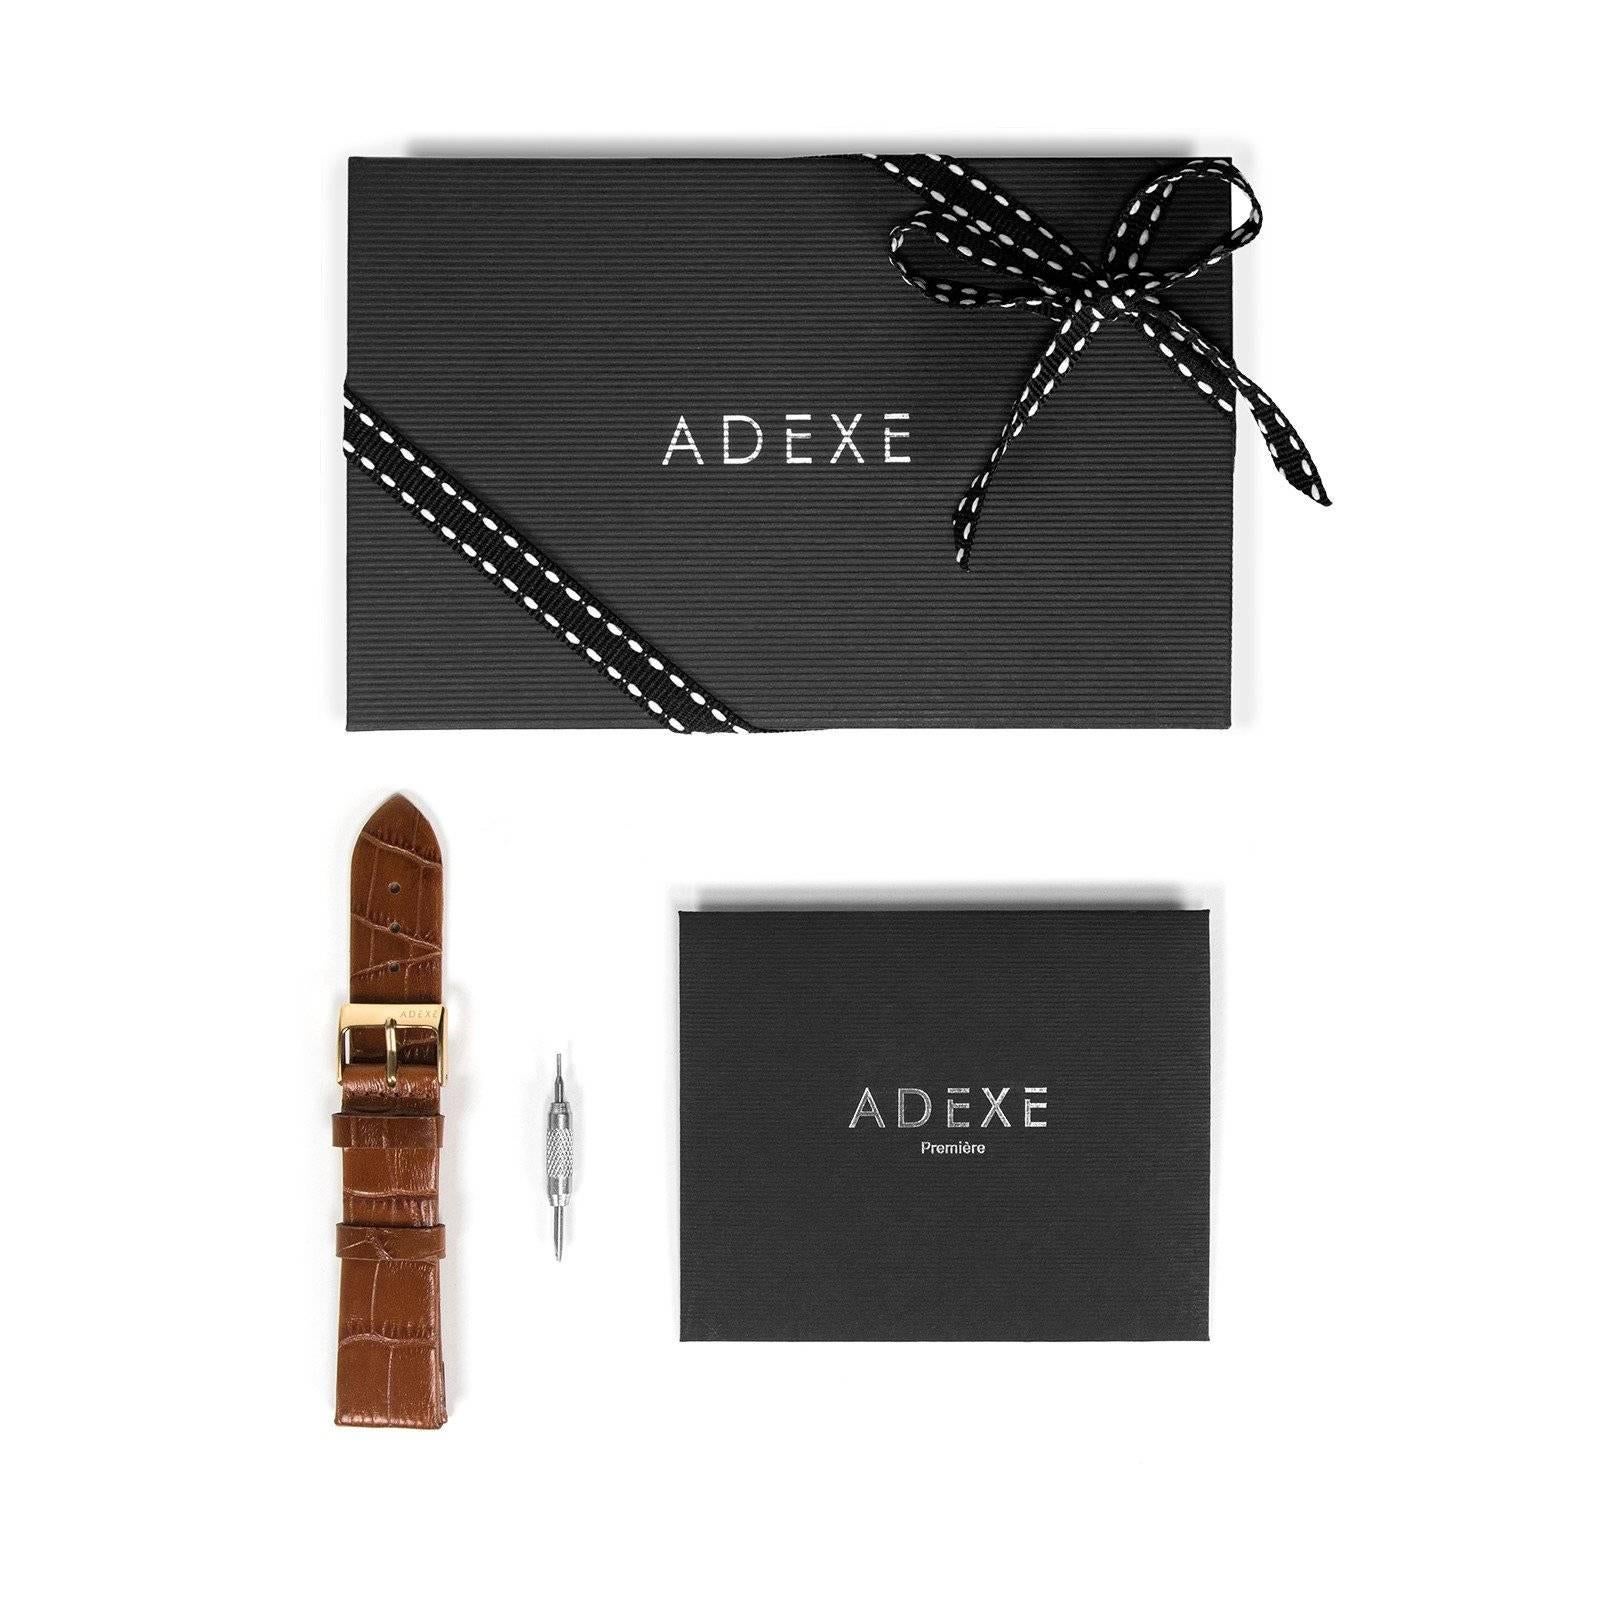 ADEXE Watches Stainless Steel Meek Petite Japanese Quartz Wristwatch In New Condition For Sale In London, GB